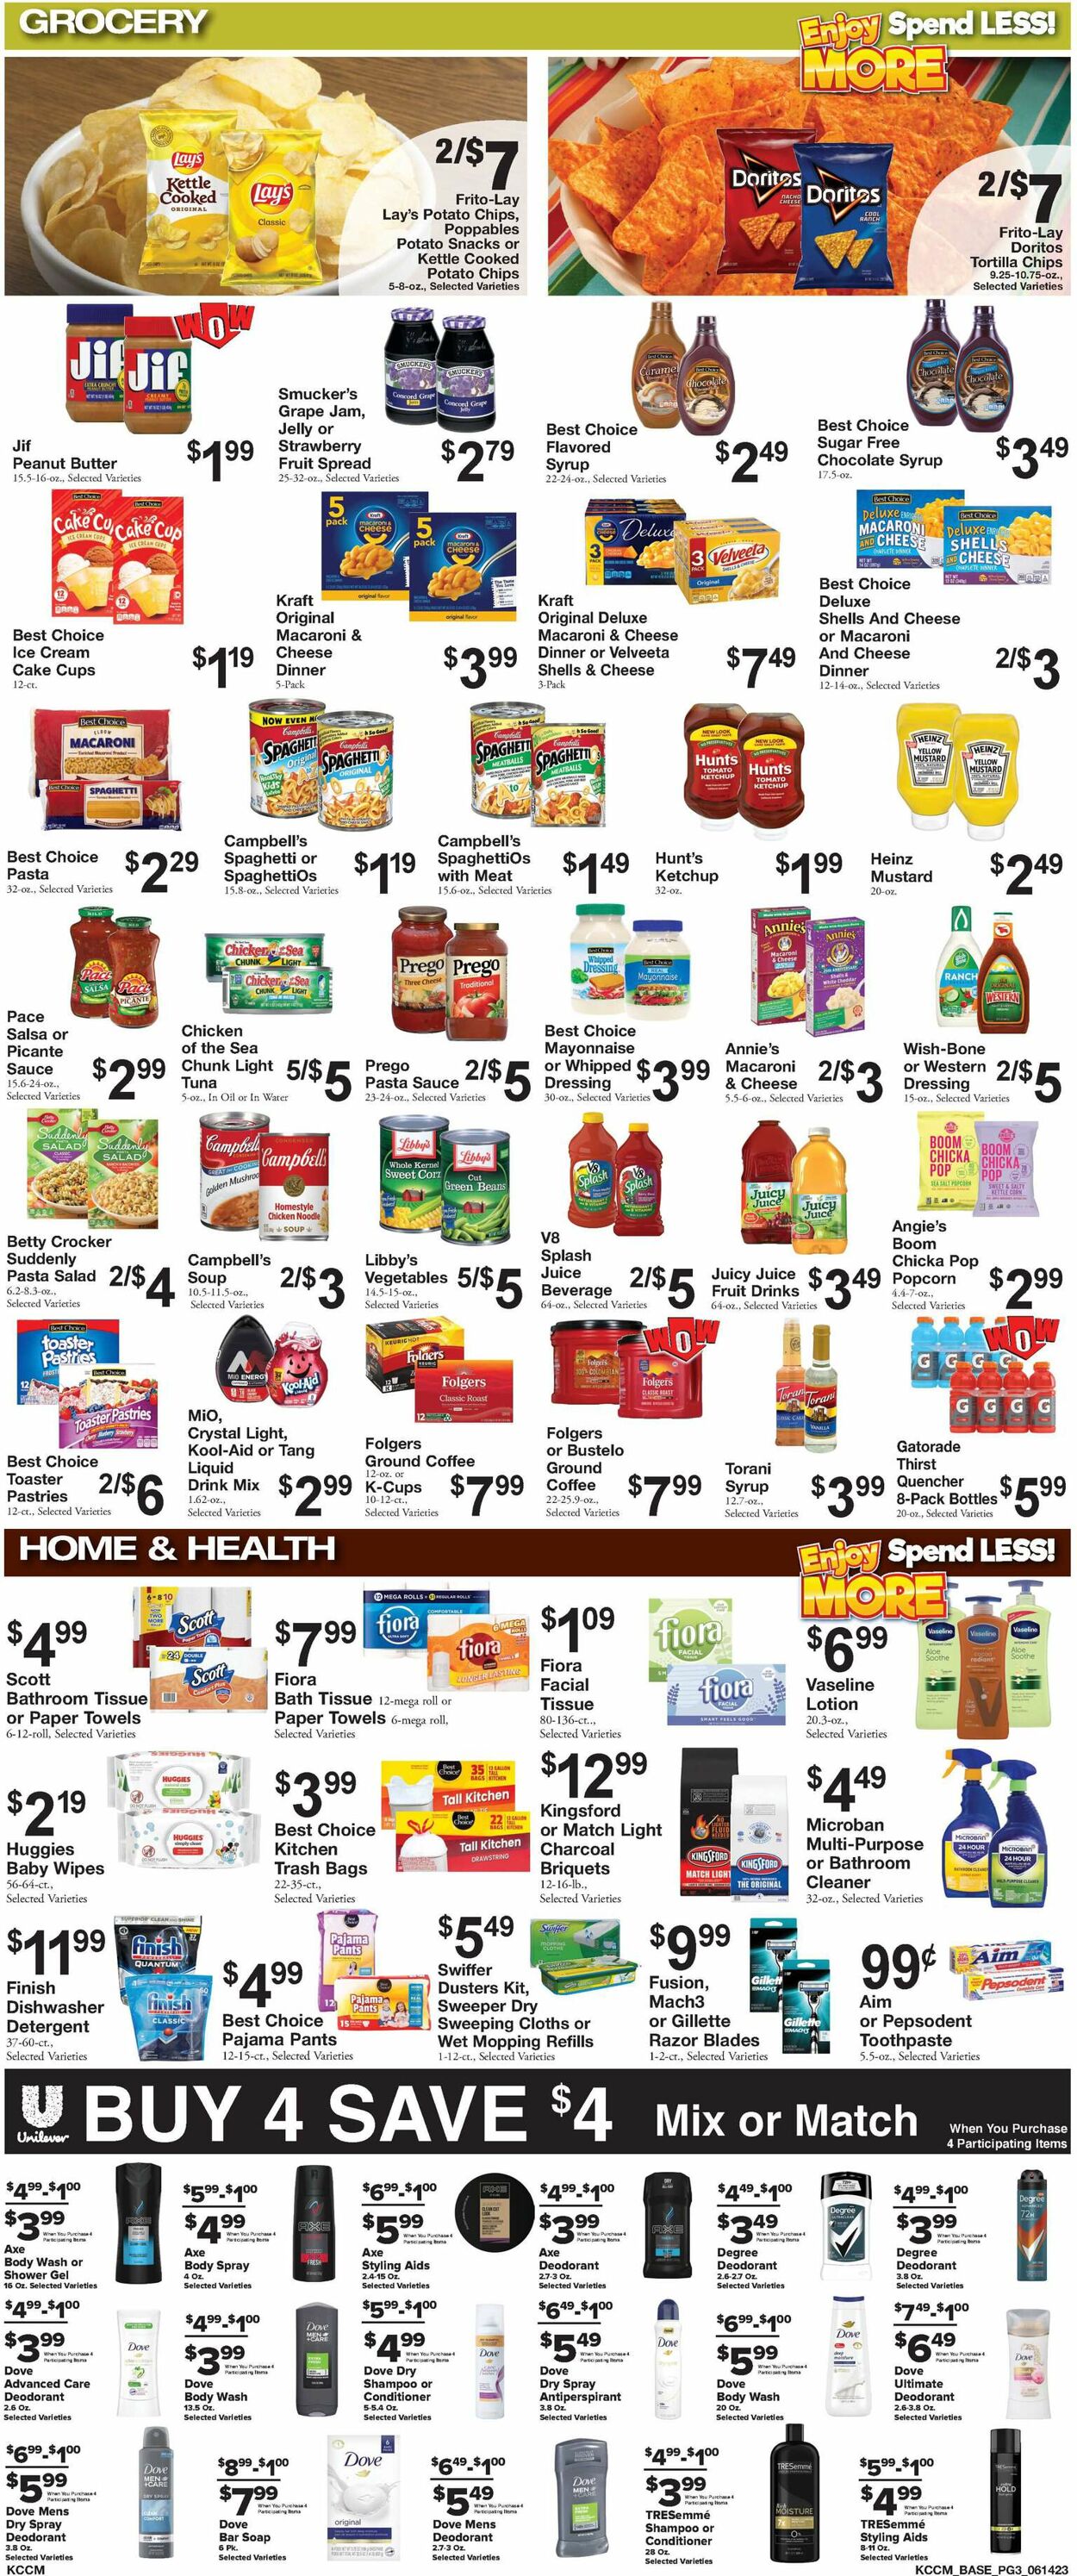 Country Mart Ad from 06/13/2023